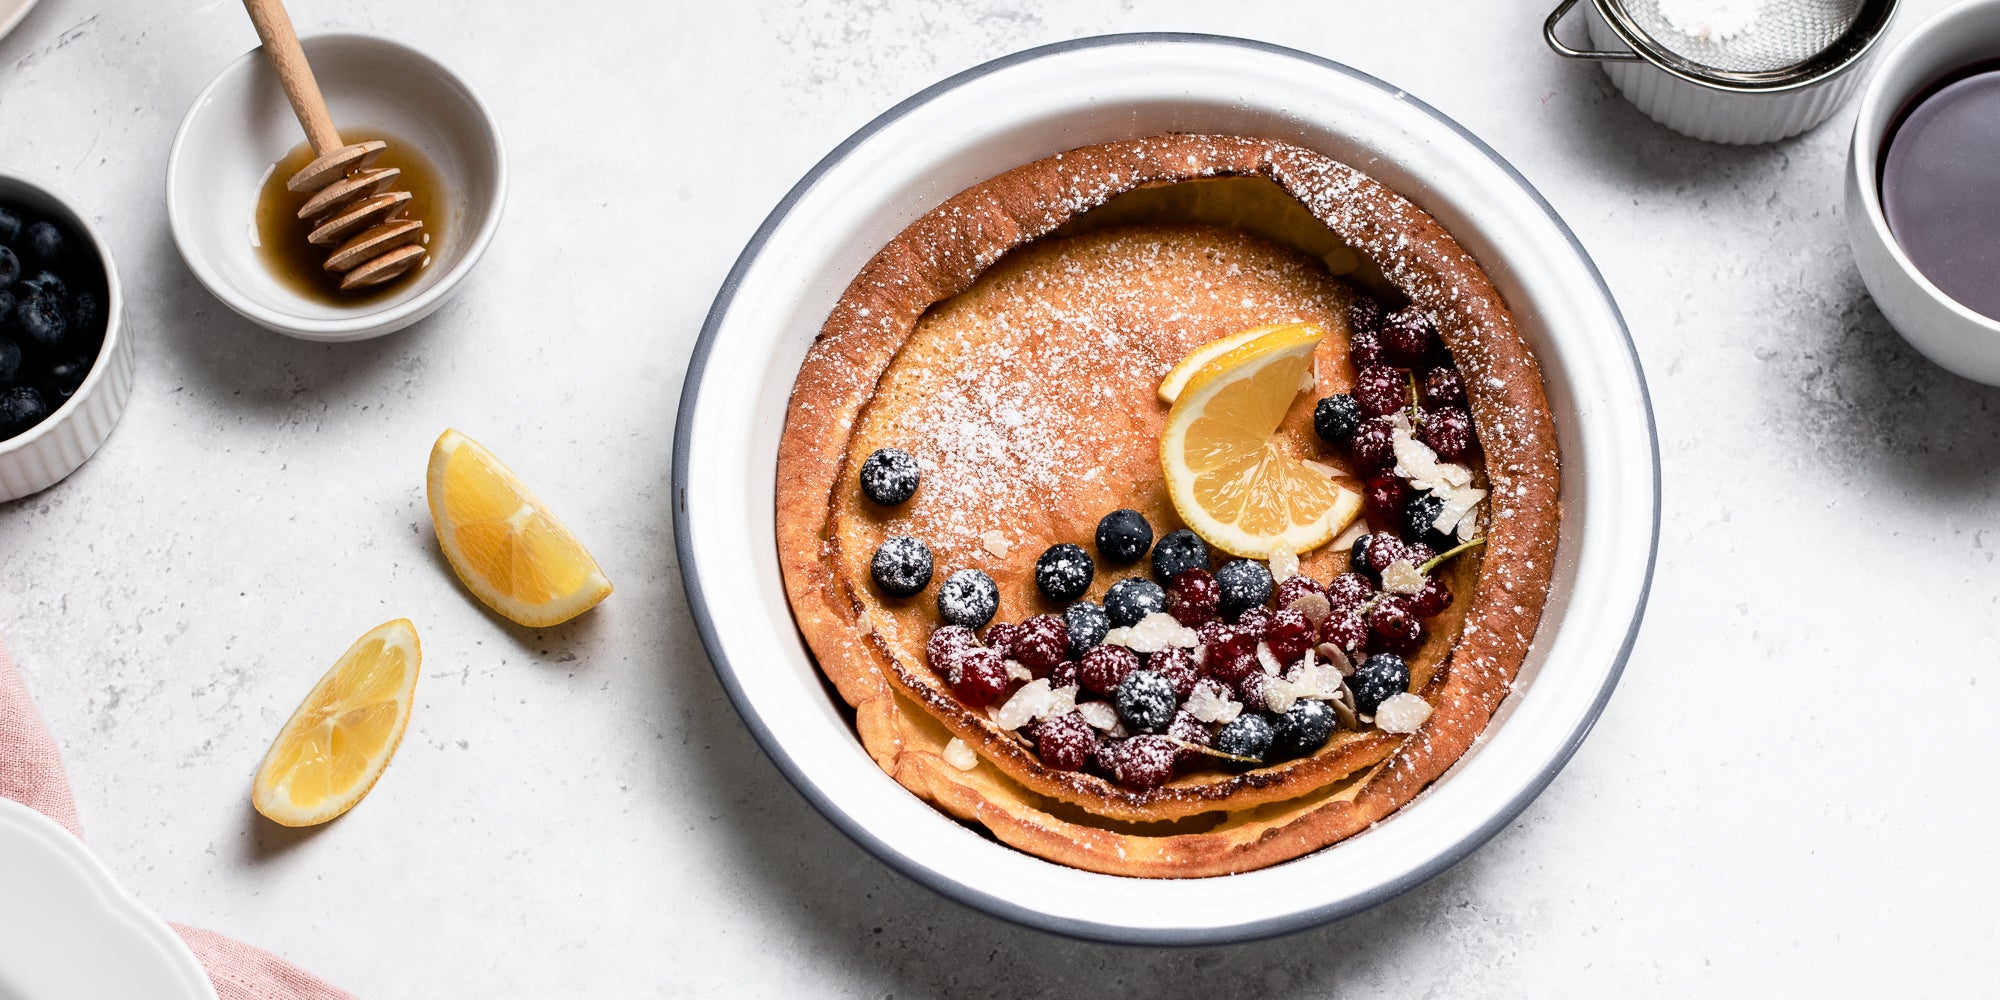 Top view of Dutch Baby Pancakes drizzled in honey, topped with berries and lemon, next to cups of coffee, a honey drizzler and ramekin of blueberries